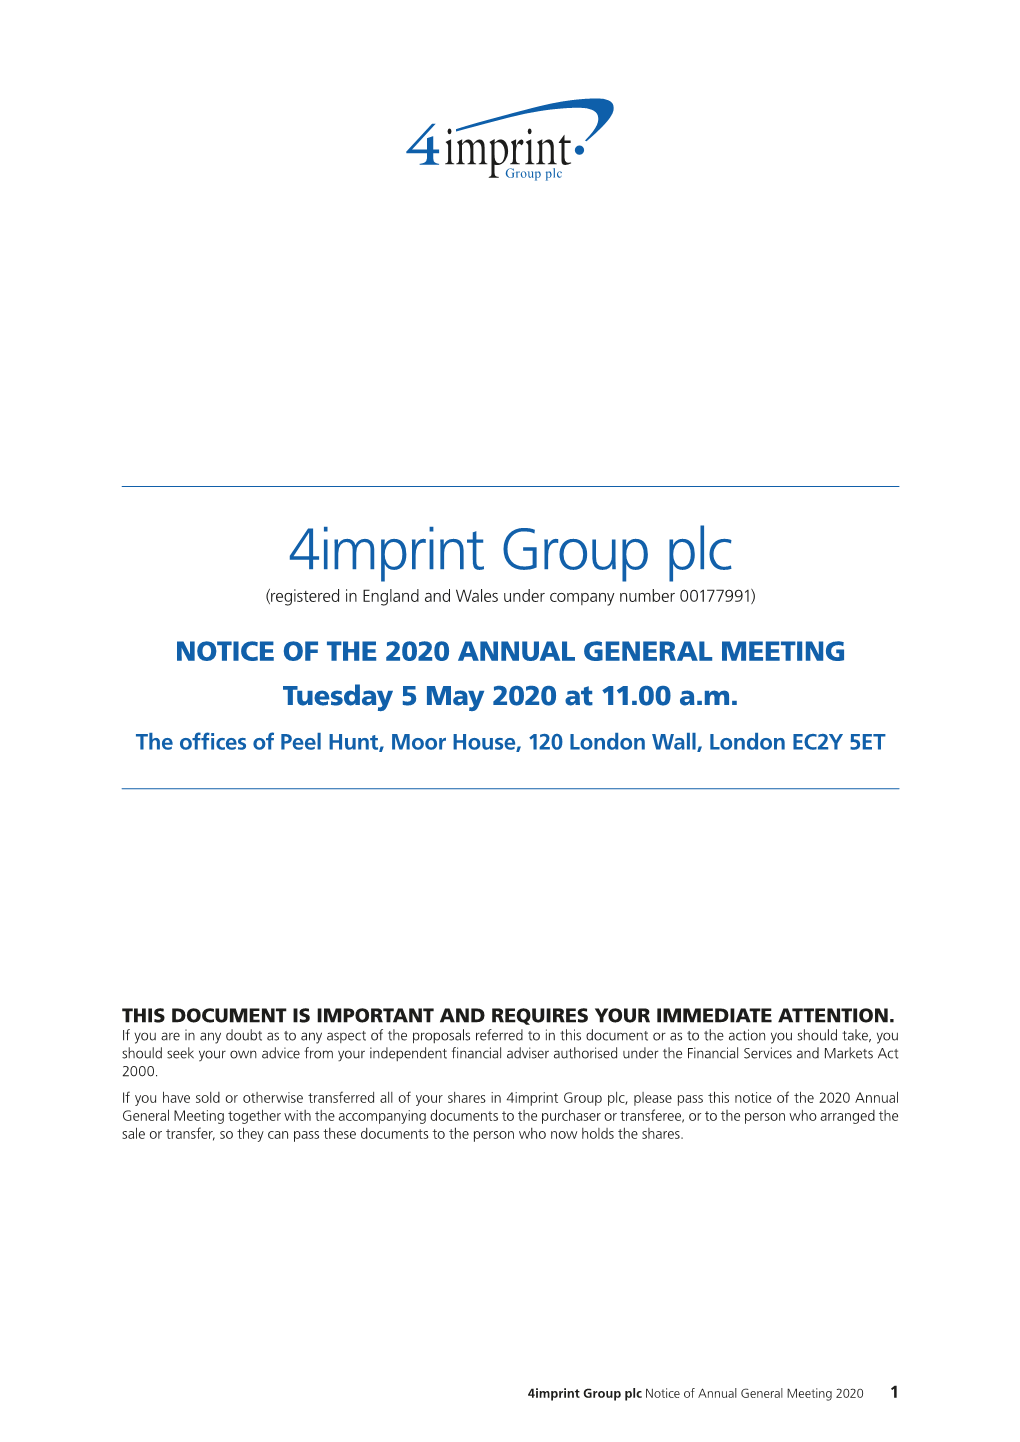 4Imprint Group Plc (Registered in England and Wales Under Company Number 00177991)